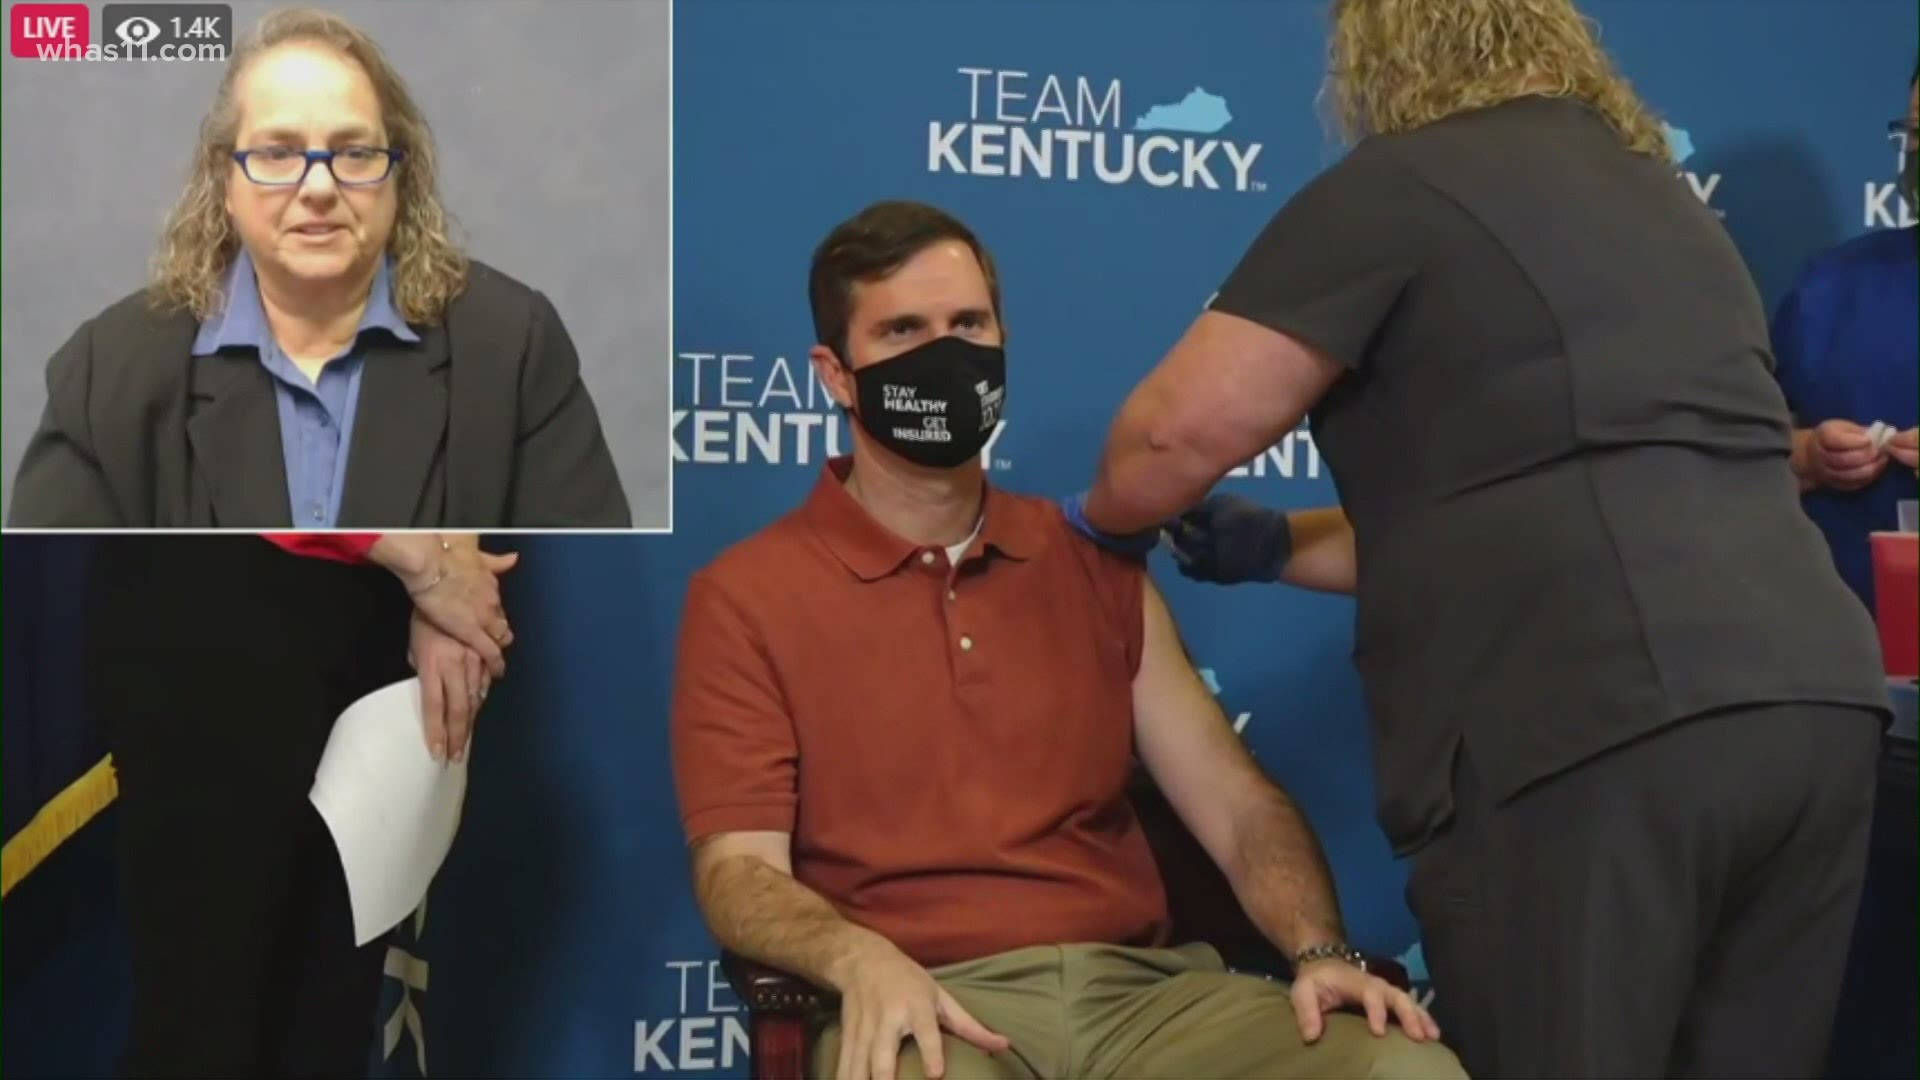 Kentucky Governor Andy Beshear and Kentucky First Lady Britainy Beshear along with several other officials got their COVID-19 vaccine Dec. 22.